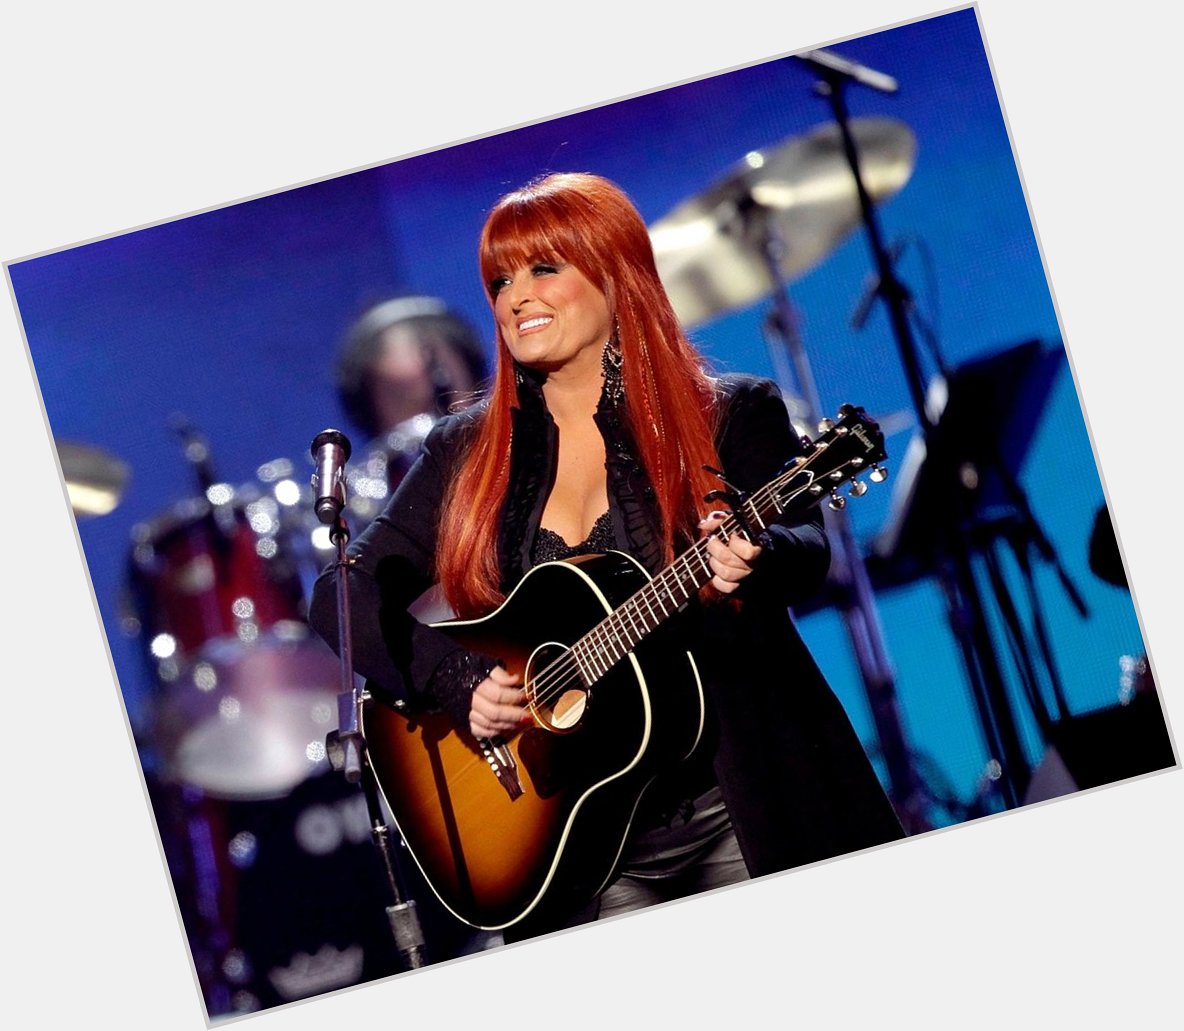 Happy Birthday Wynonna Judd!
What are your favorite and The Judds songs / lyrics / memories? 